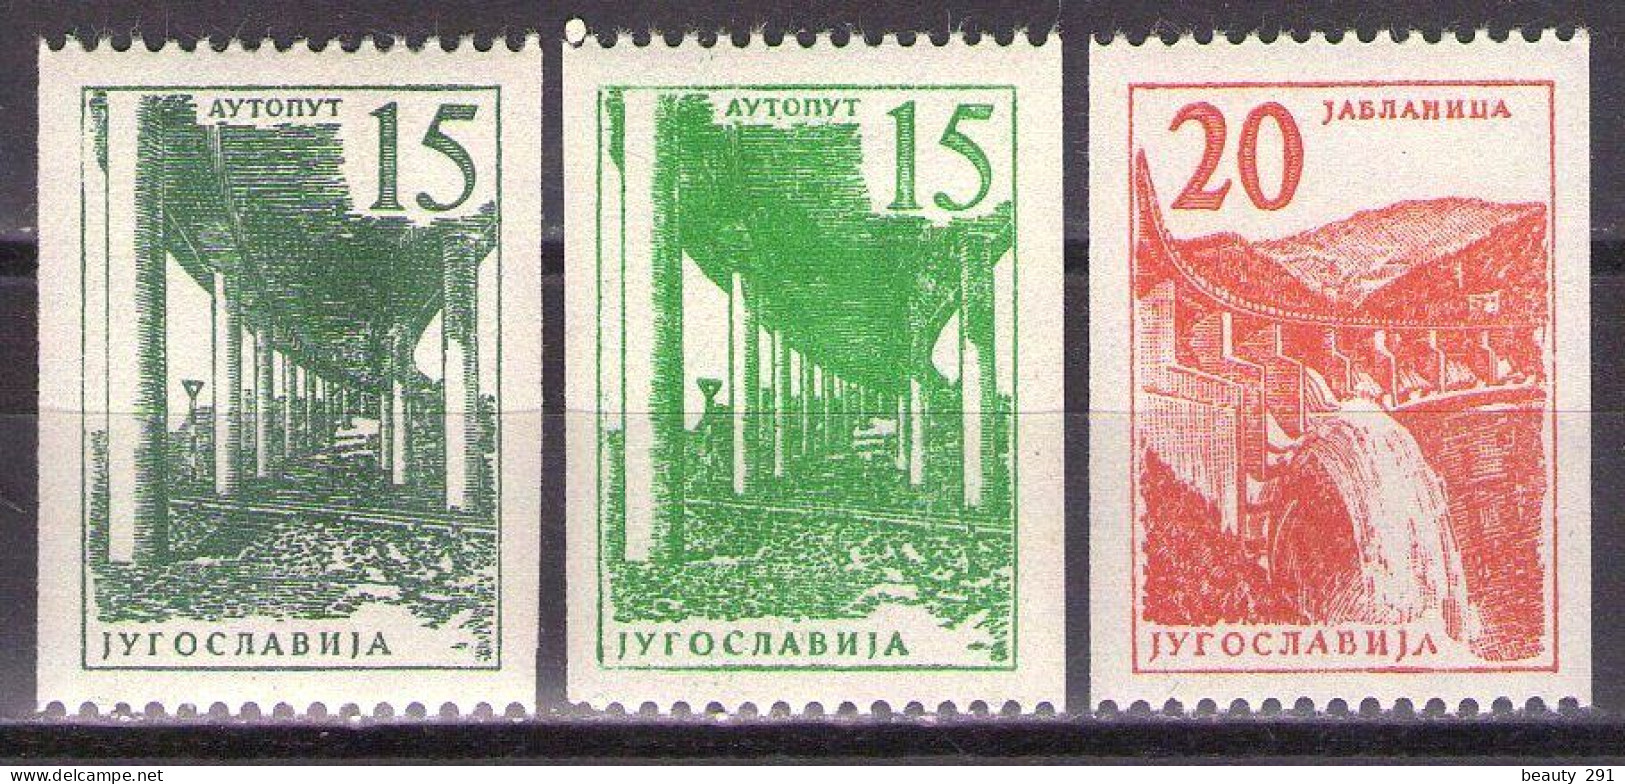 Yugoslavia 1959 - Industry And Architecture Coil Stamps - Mi 898-899a,b - MNH**VF - Ongebruikt